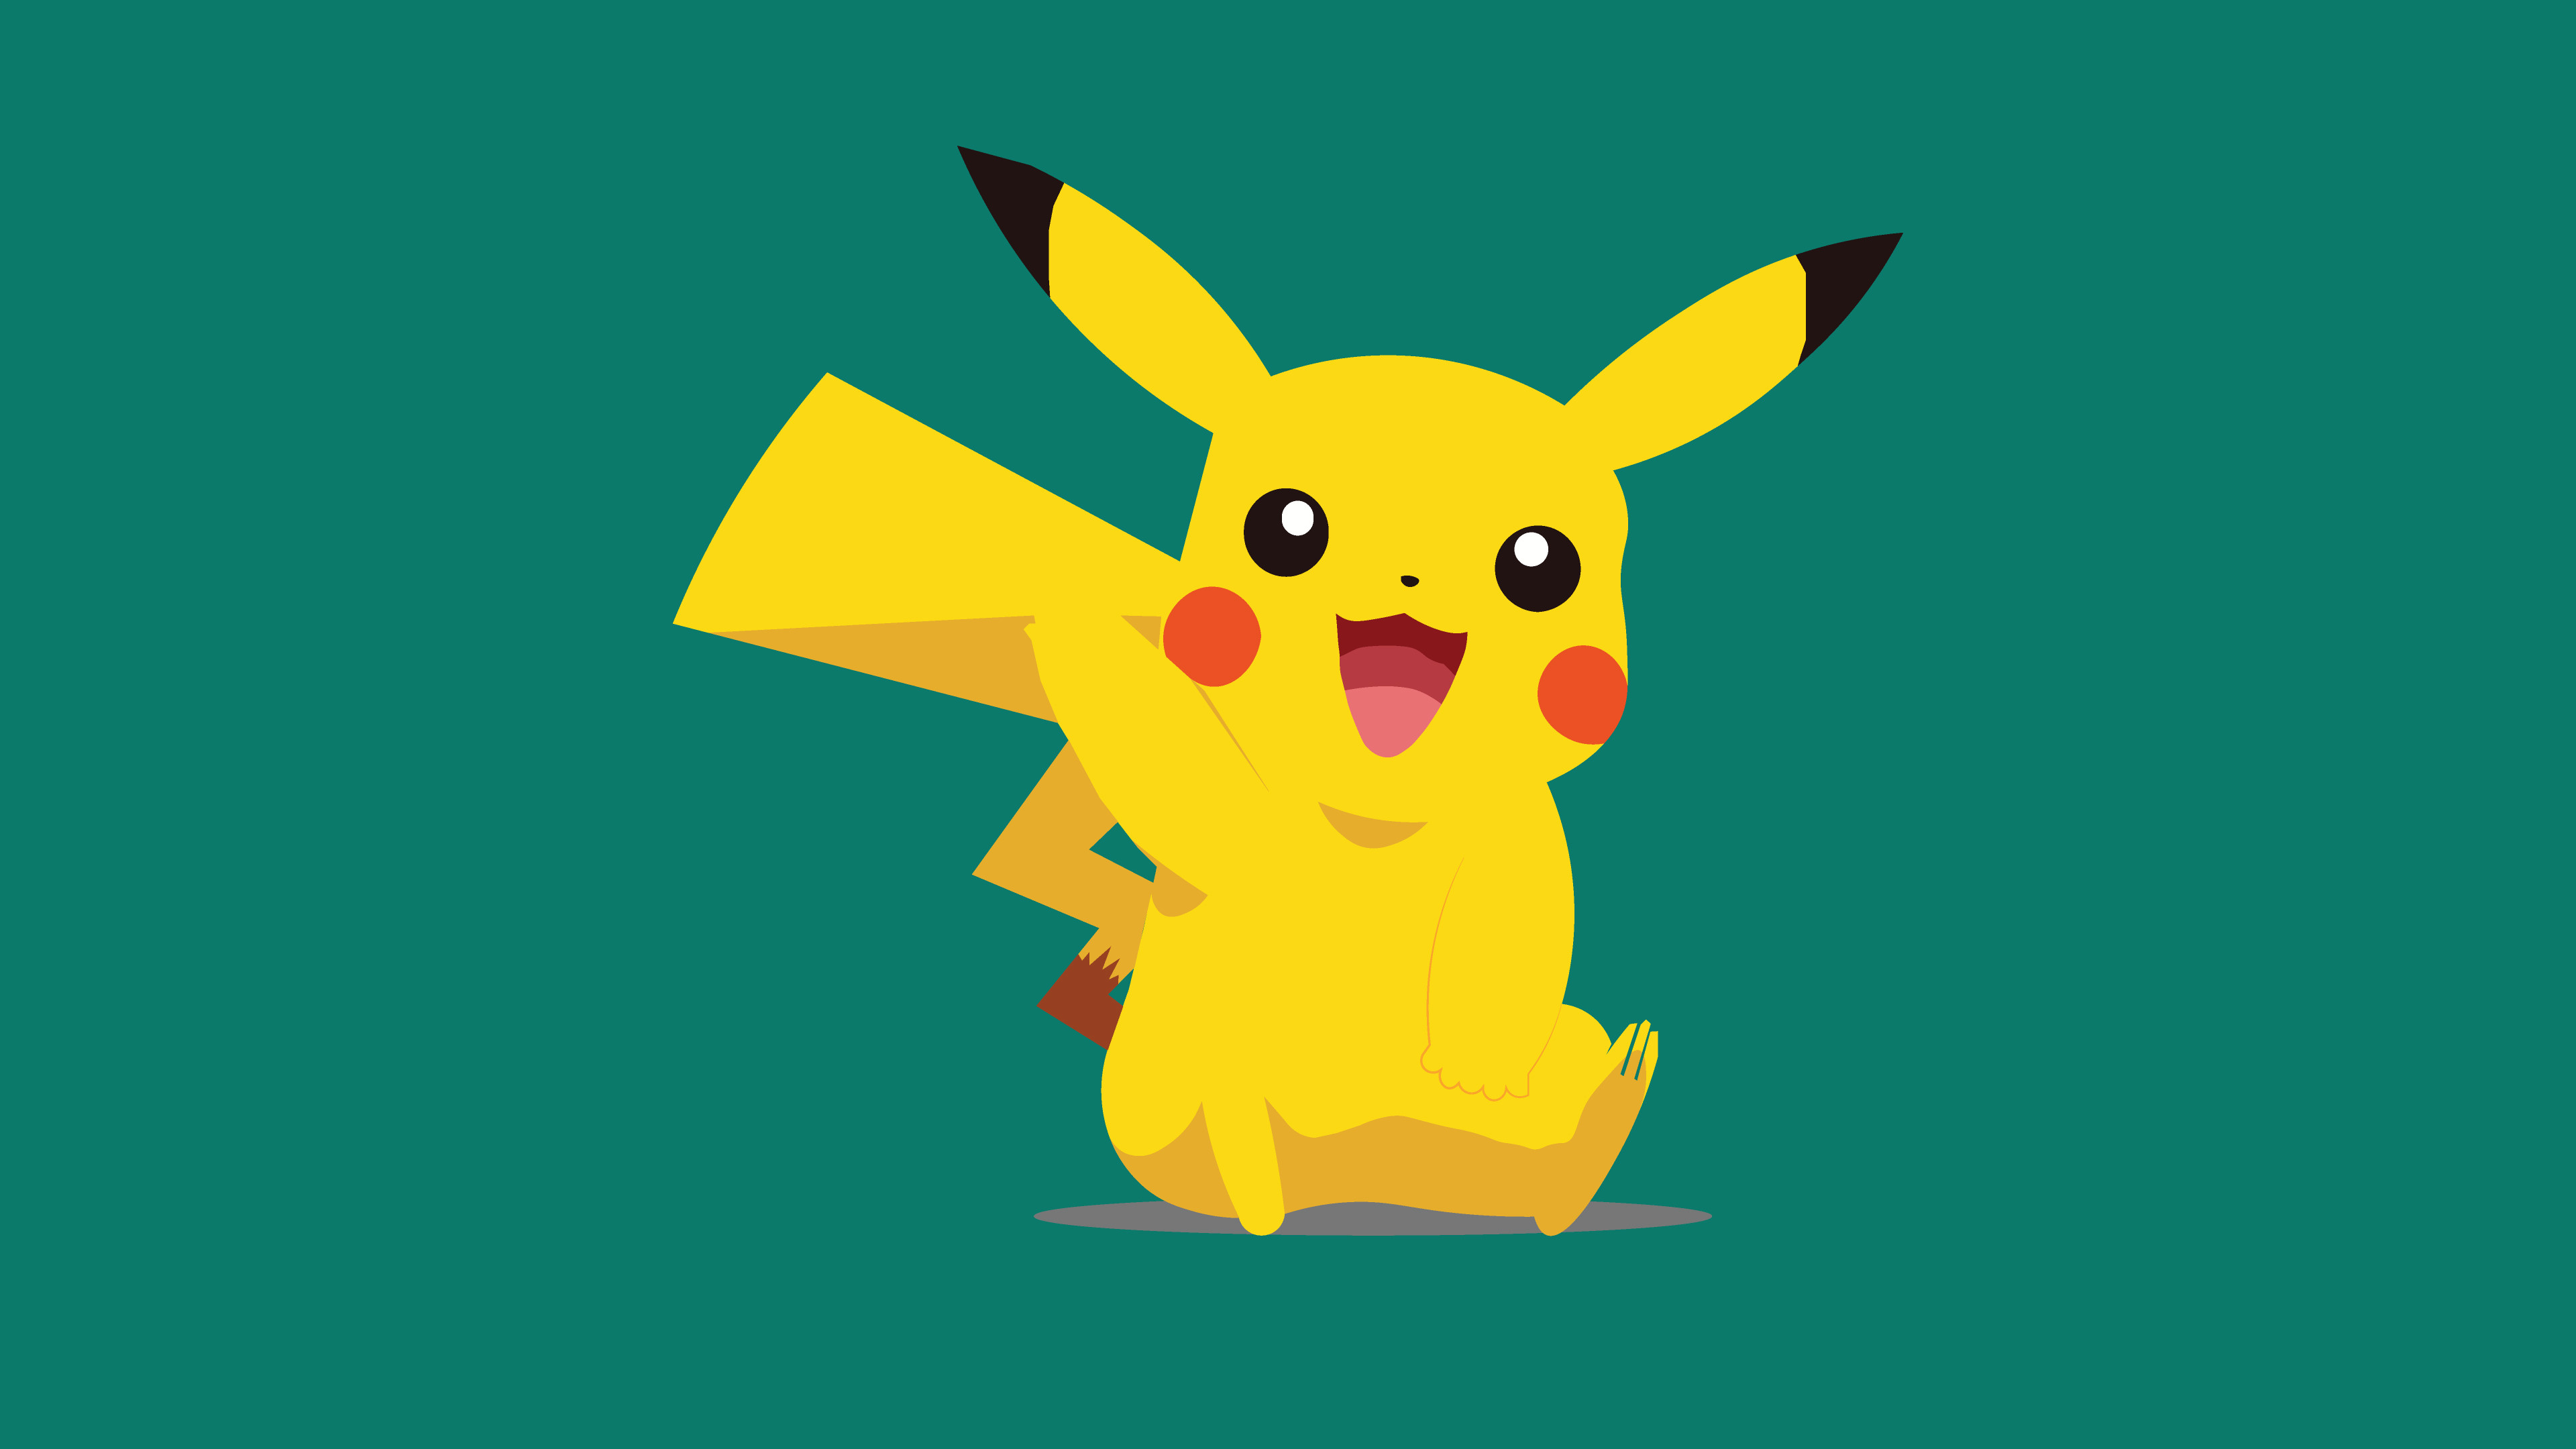 Pikachu Wallpapers For Computer 64 Images HD Wallpapers Download Free Images Wallpaper [wallpaper981.blogspot.com]